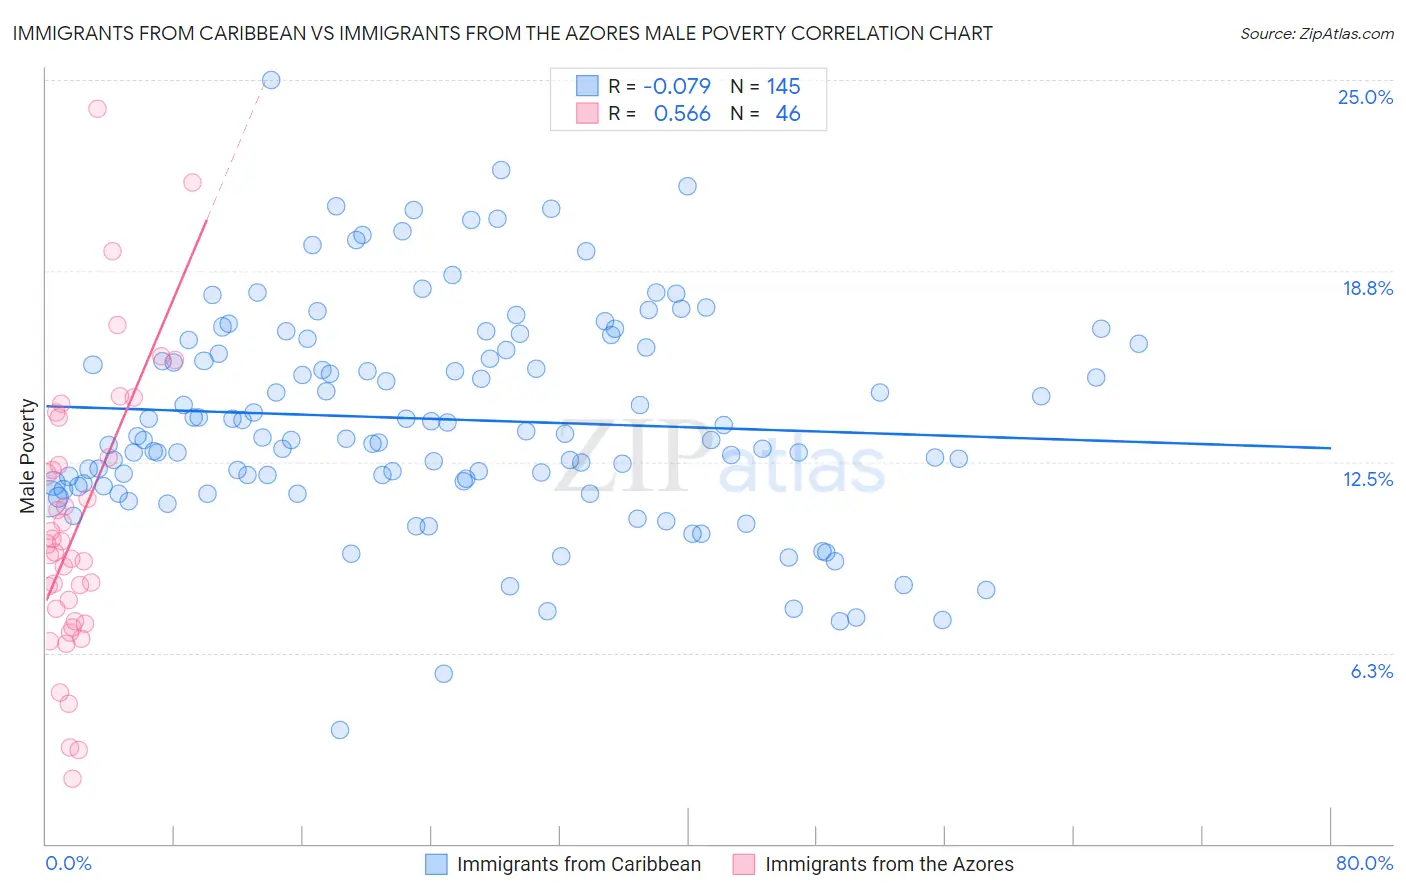 Immigrants from Caribbean vs Immigrants from the Azores Male Poverty